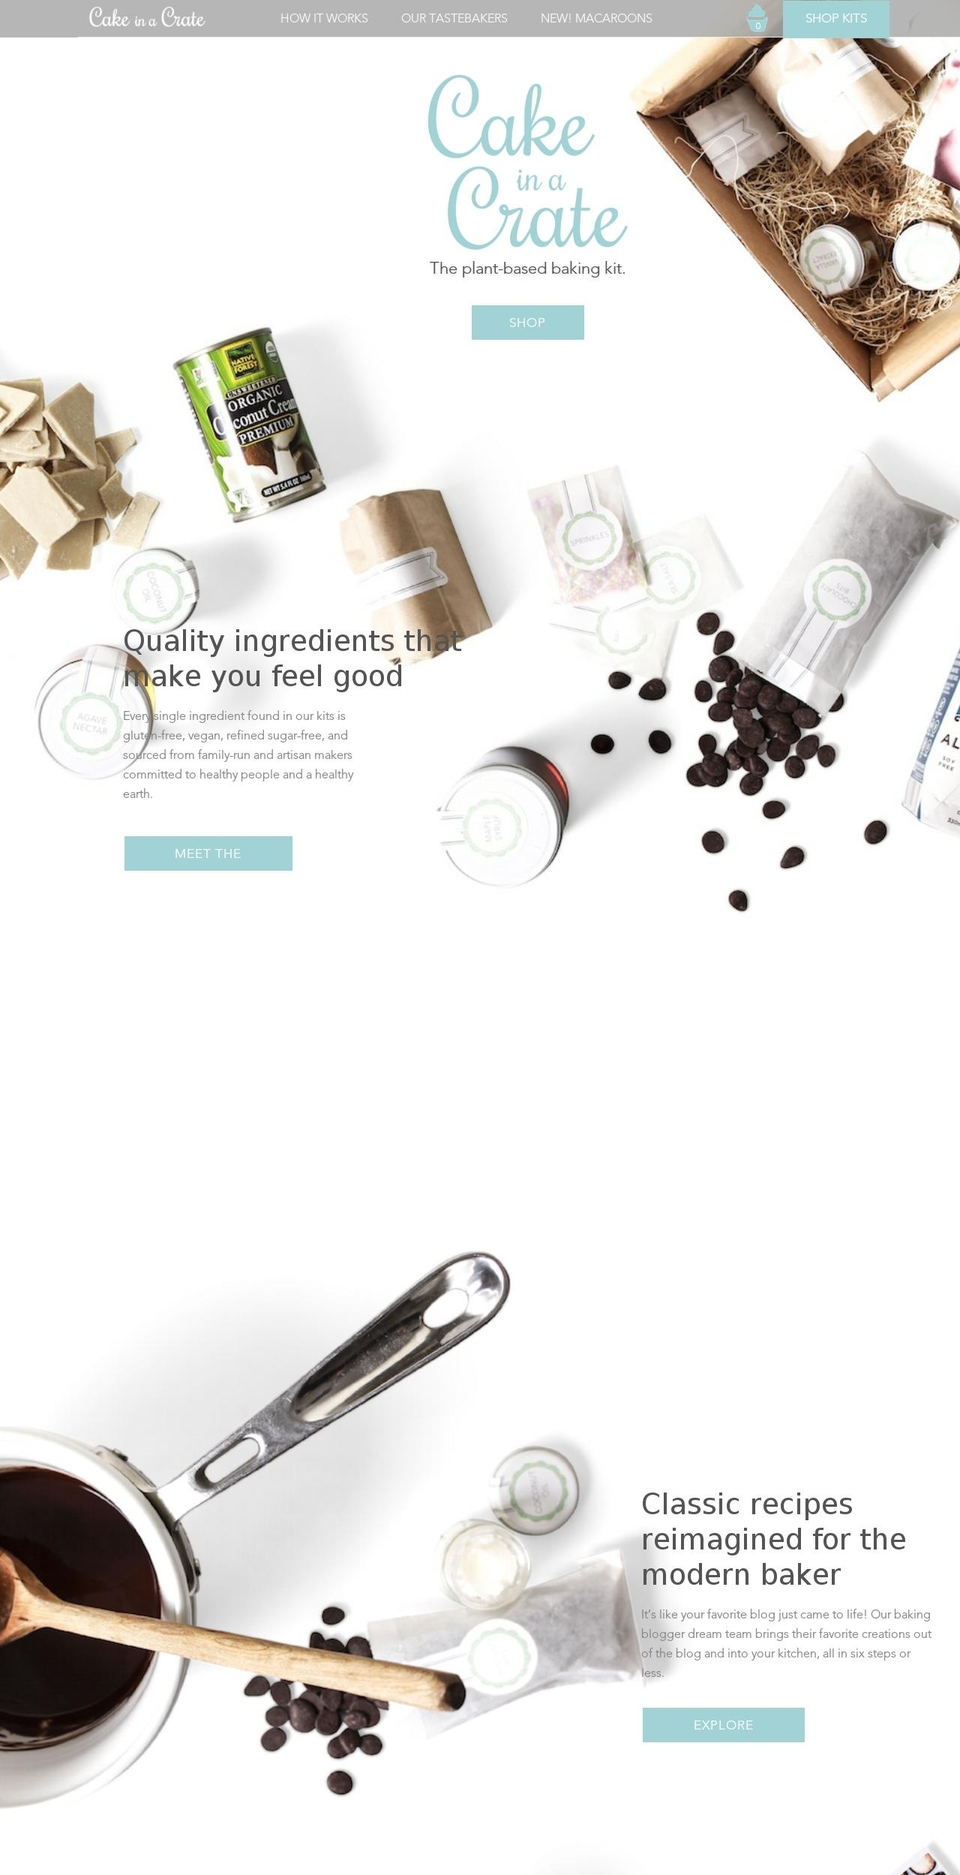 Gifts Shopify theme site example cakeinacrate.com